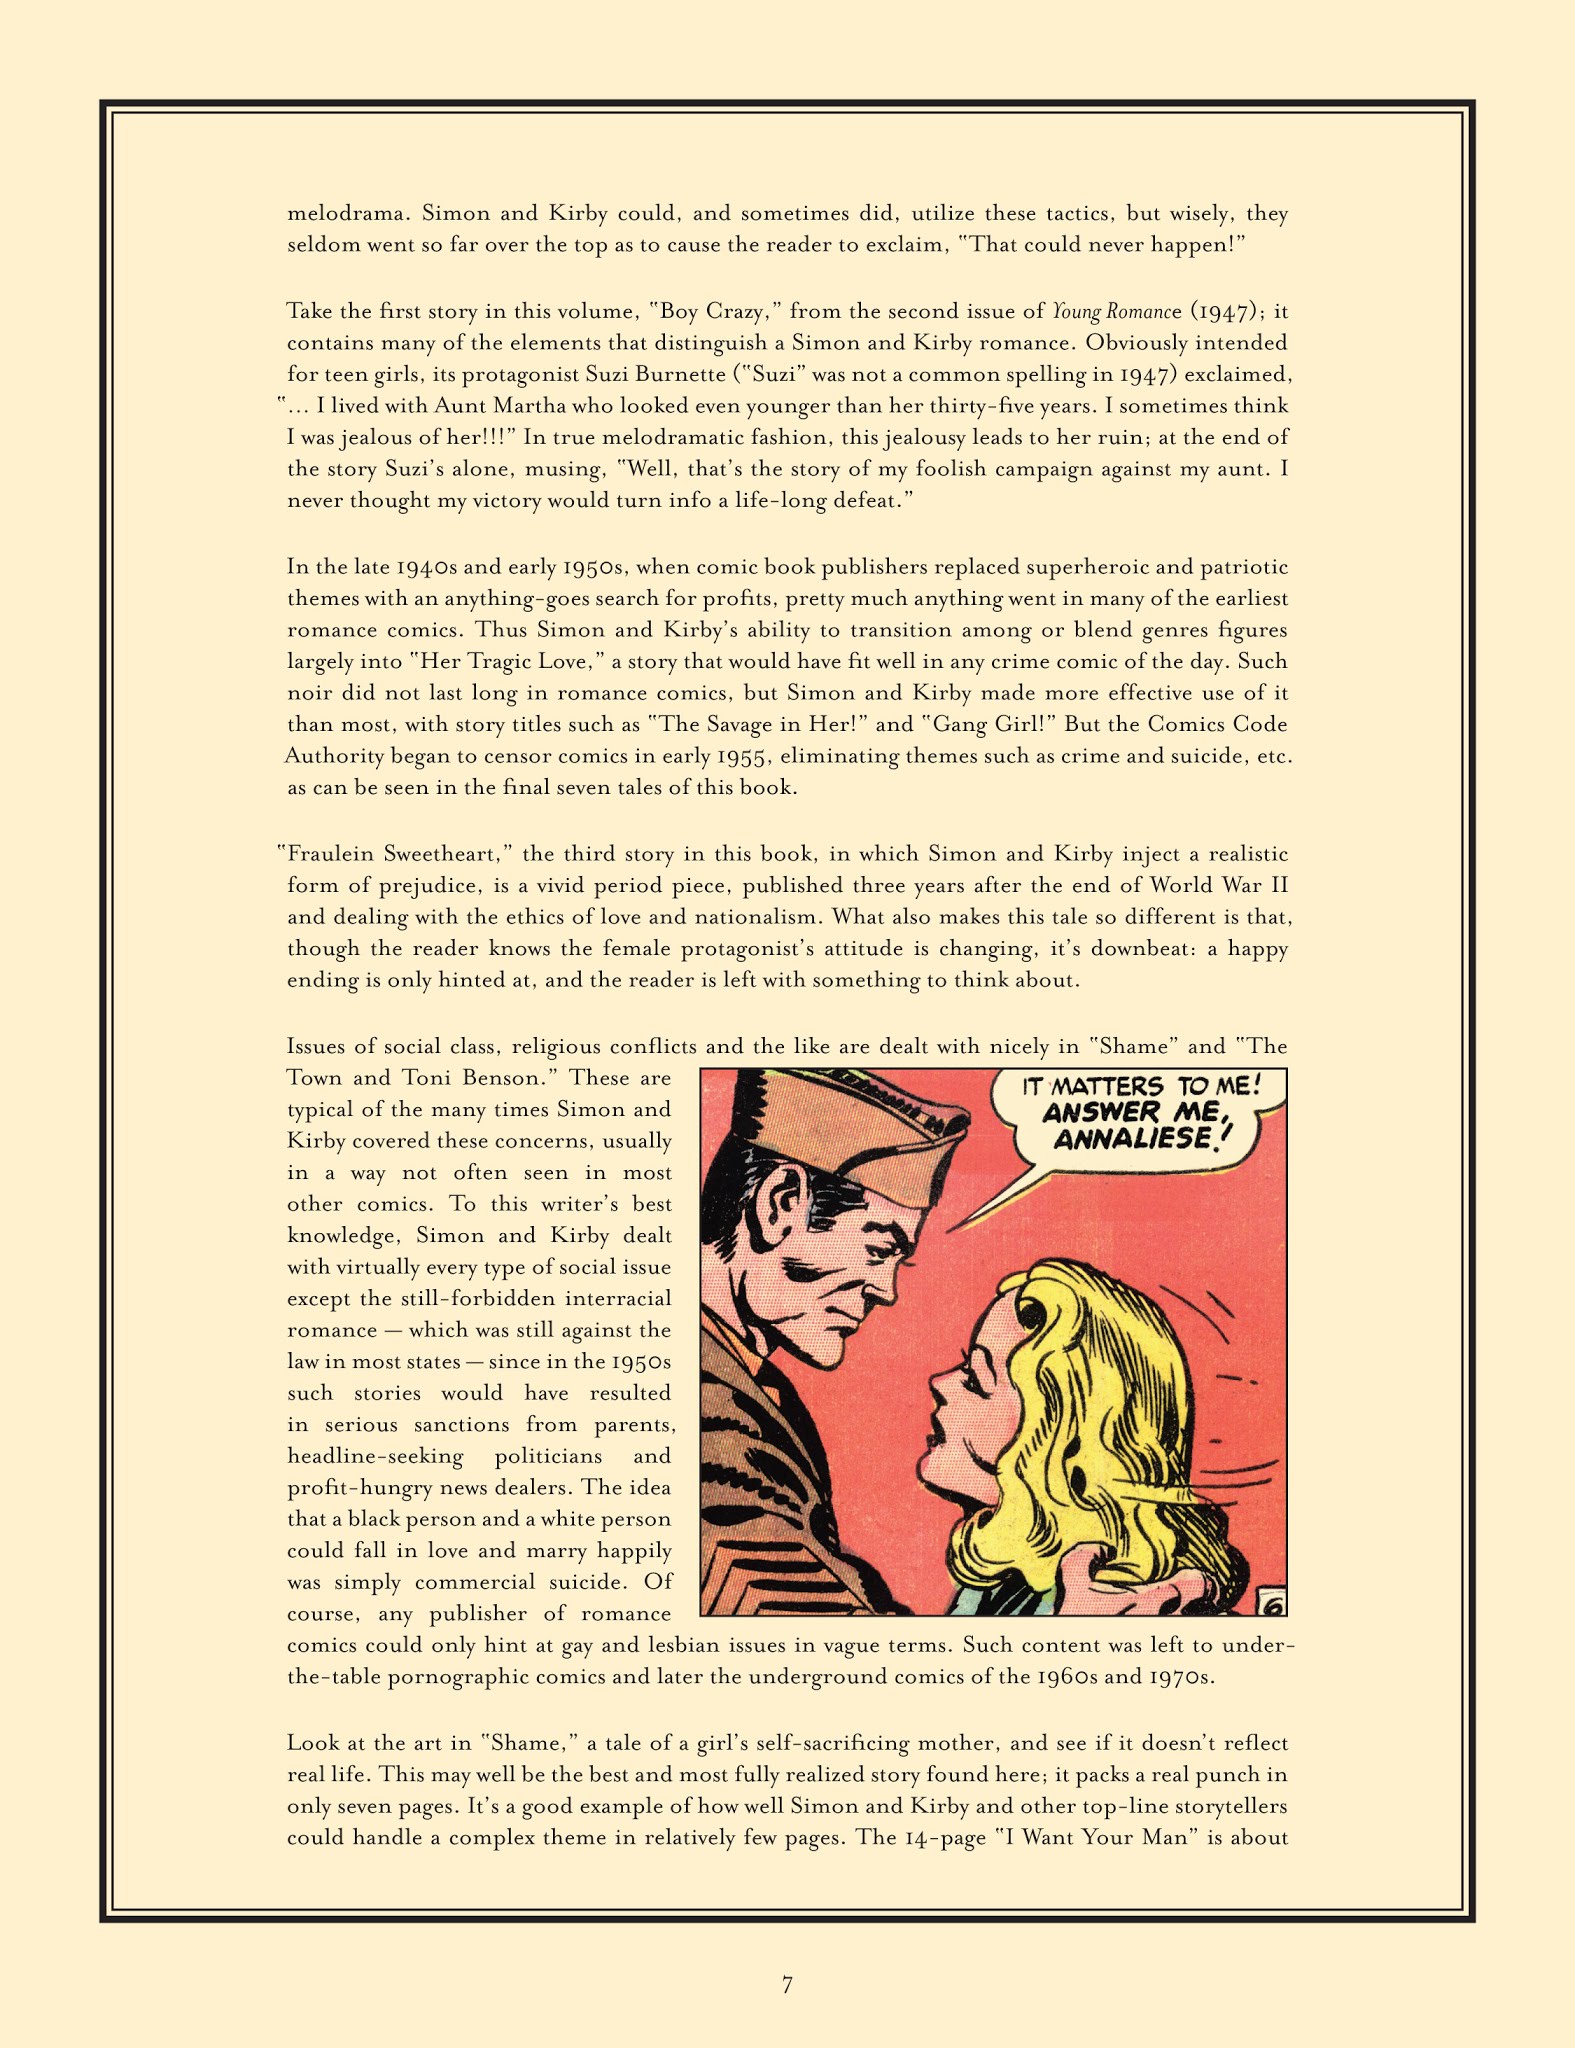 Read online Young Romance: The Best of Simon & Kirby’s Romance Comics comic -  Issue # TPB 3 - 8